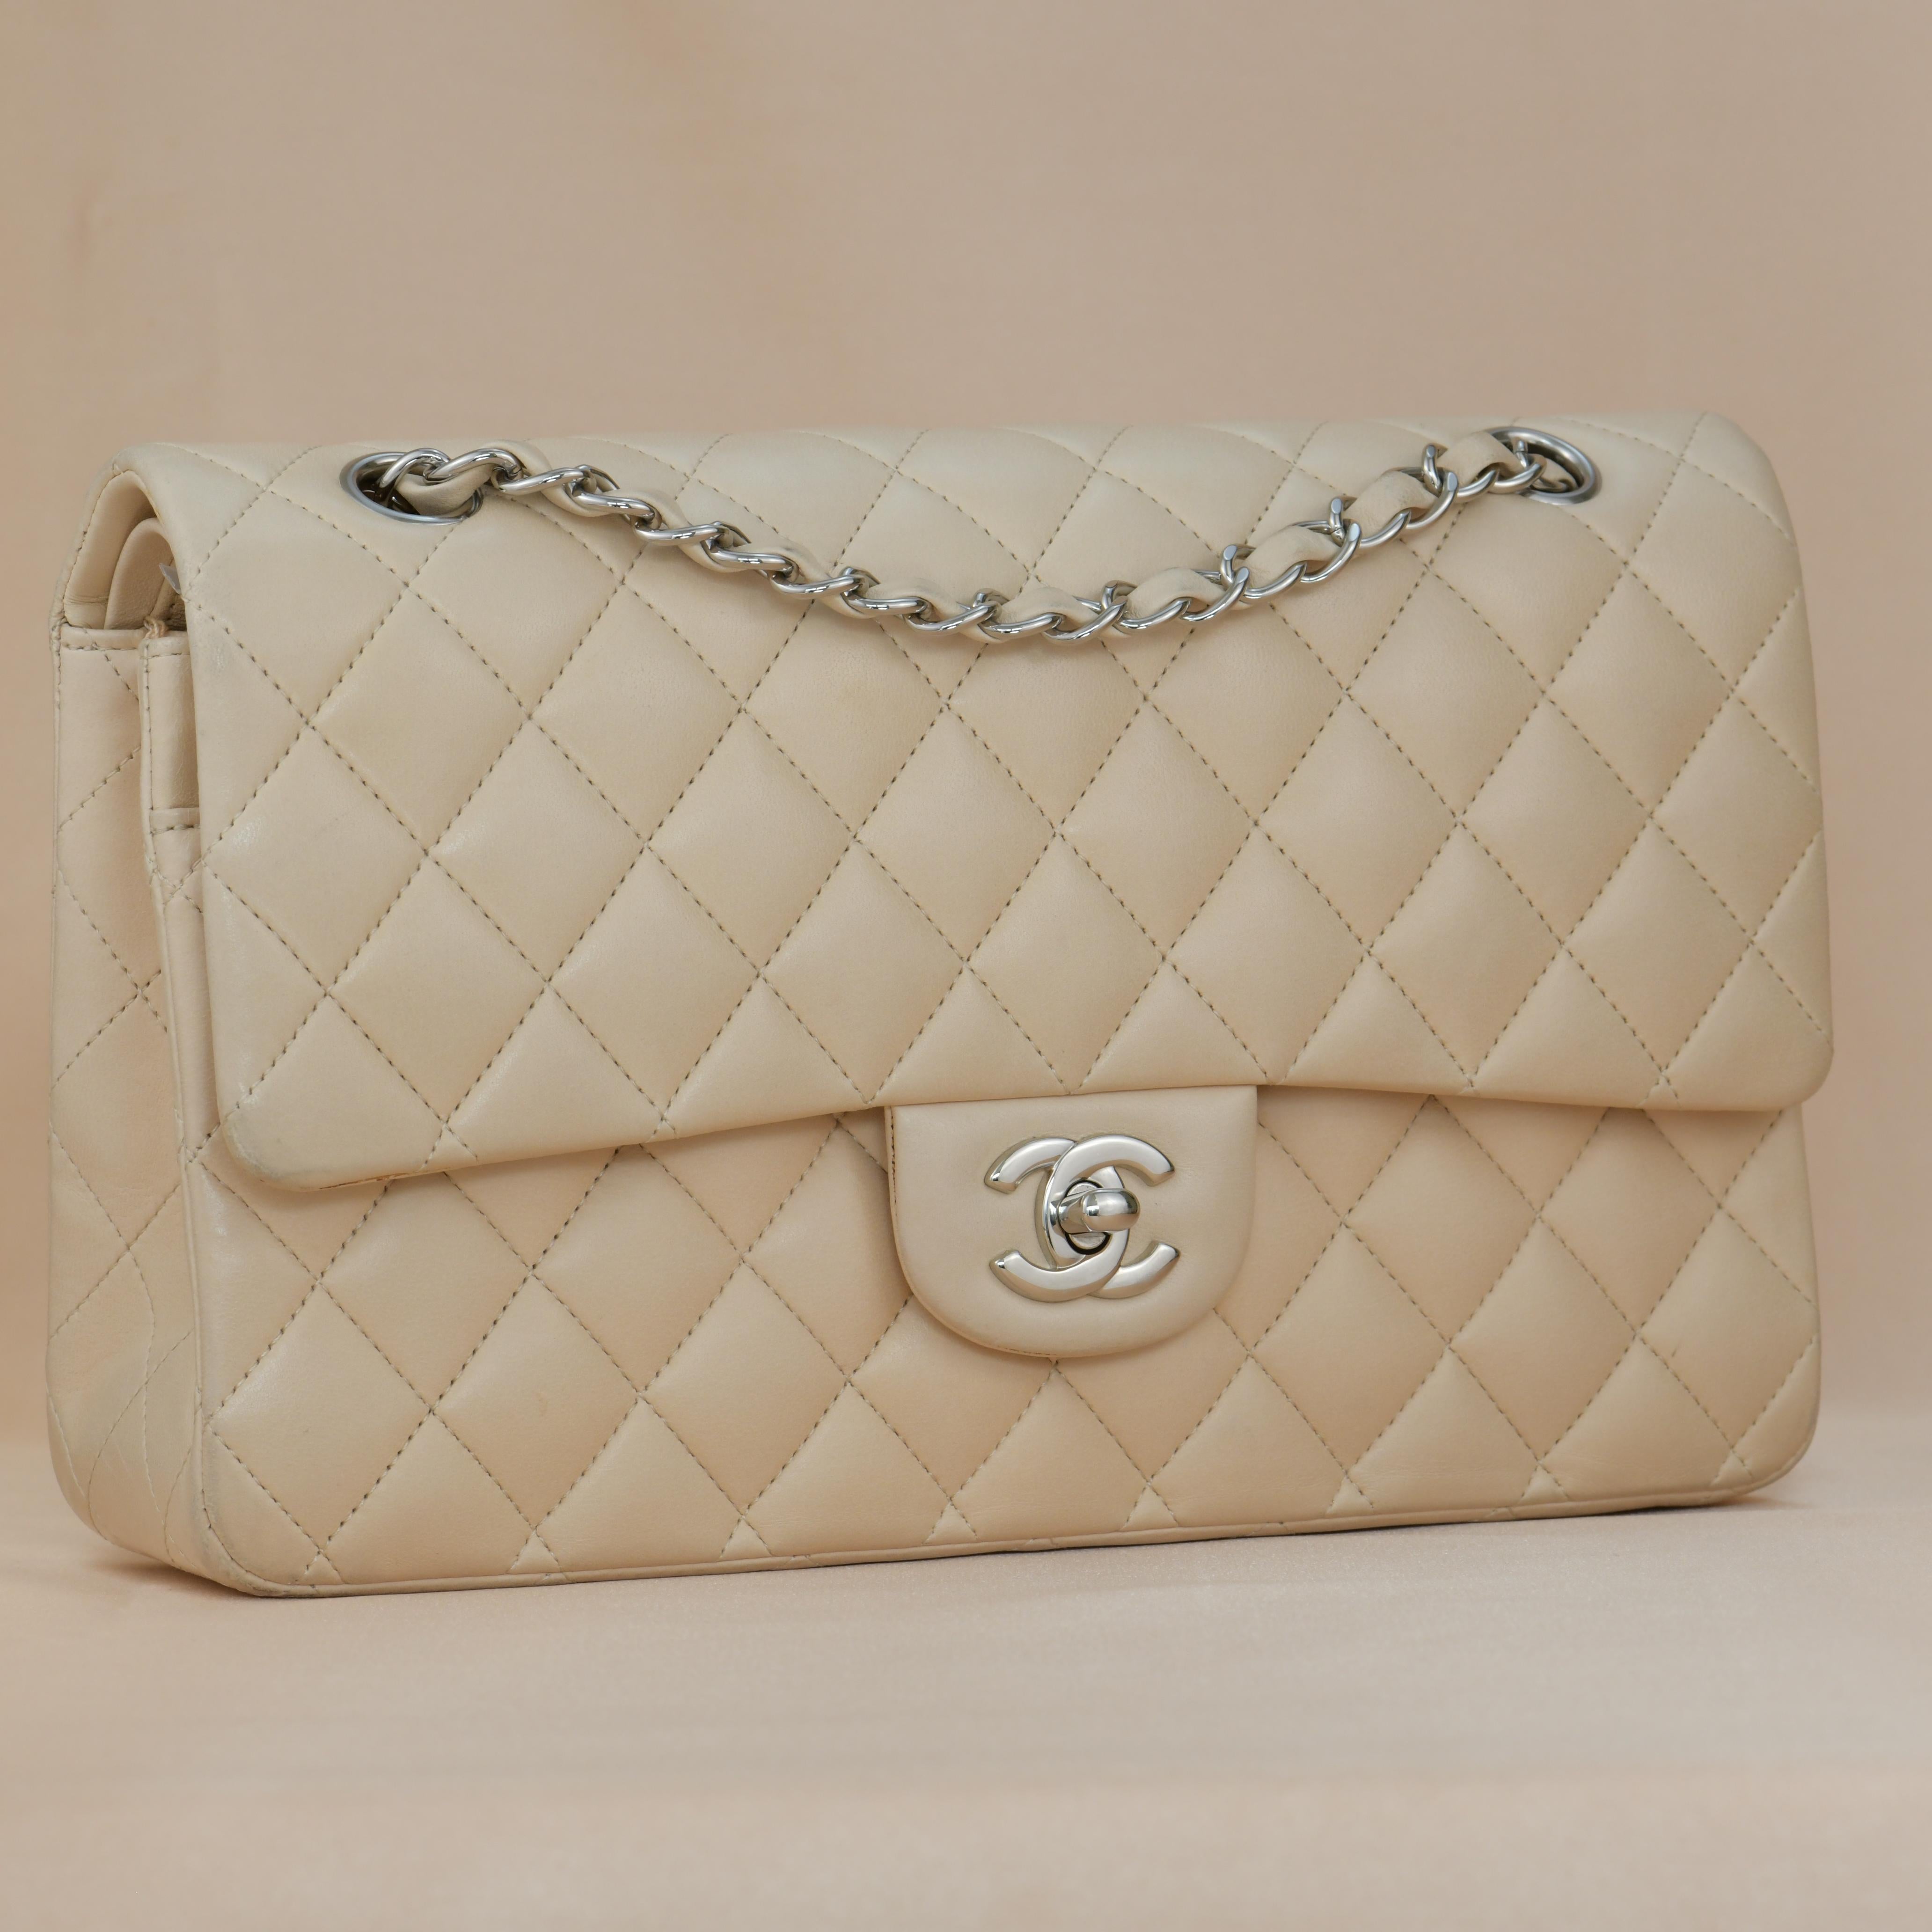 Chanel Beige Quilted Lambskin Leather Medium Classic Double Flap Bag In Excellent Condition For Sale In Banbury, GB